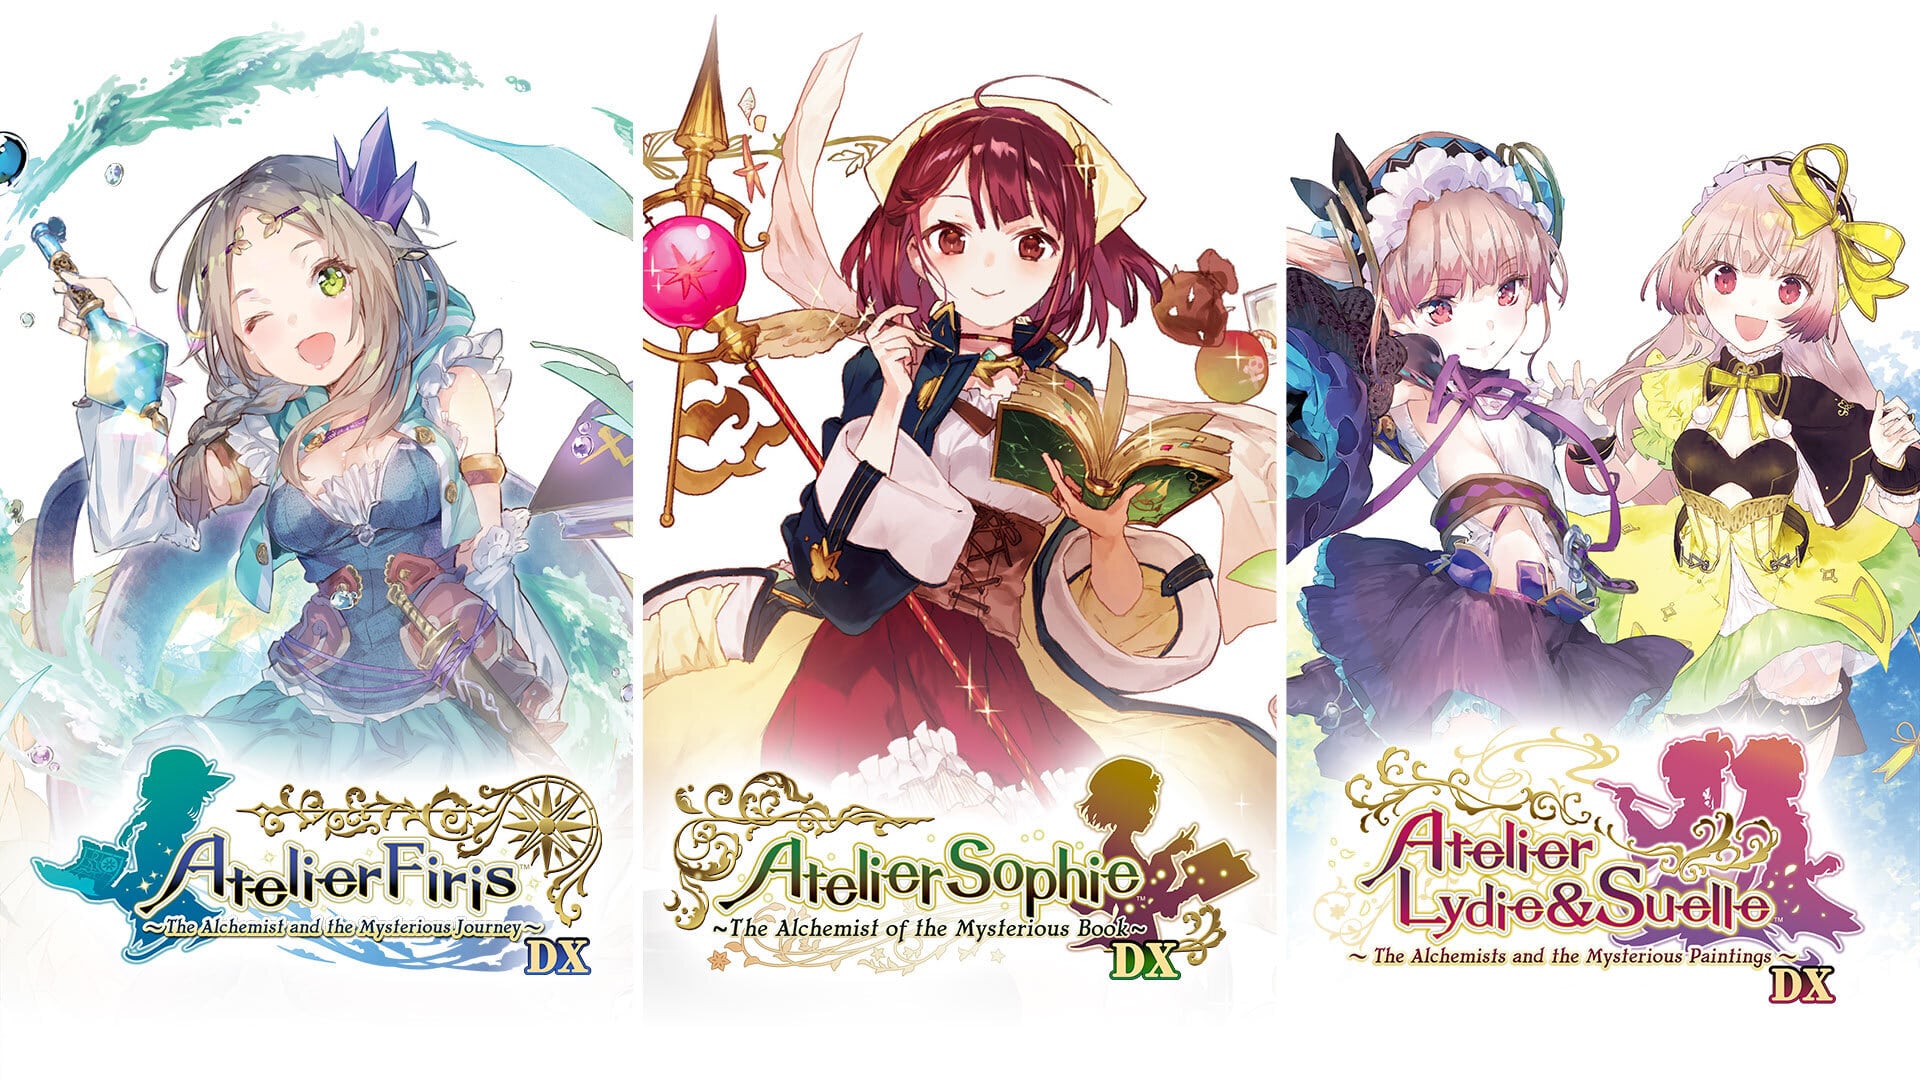 Atelier Mysterious Trilogy Deluxe Pack Discounted On PC; Sophie, Firis, Lydie & Suelle